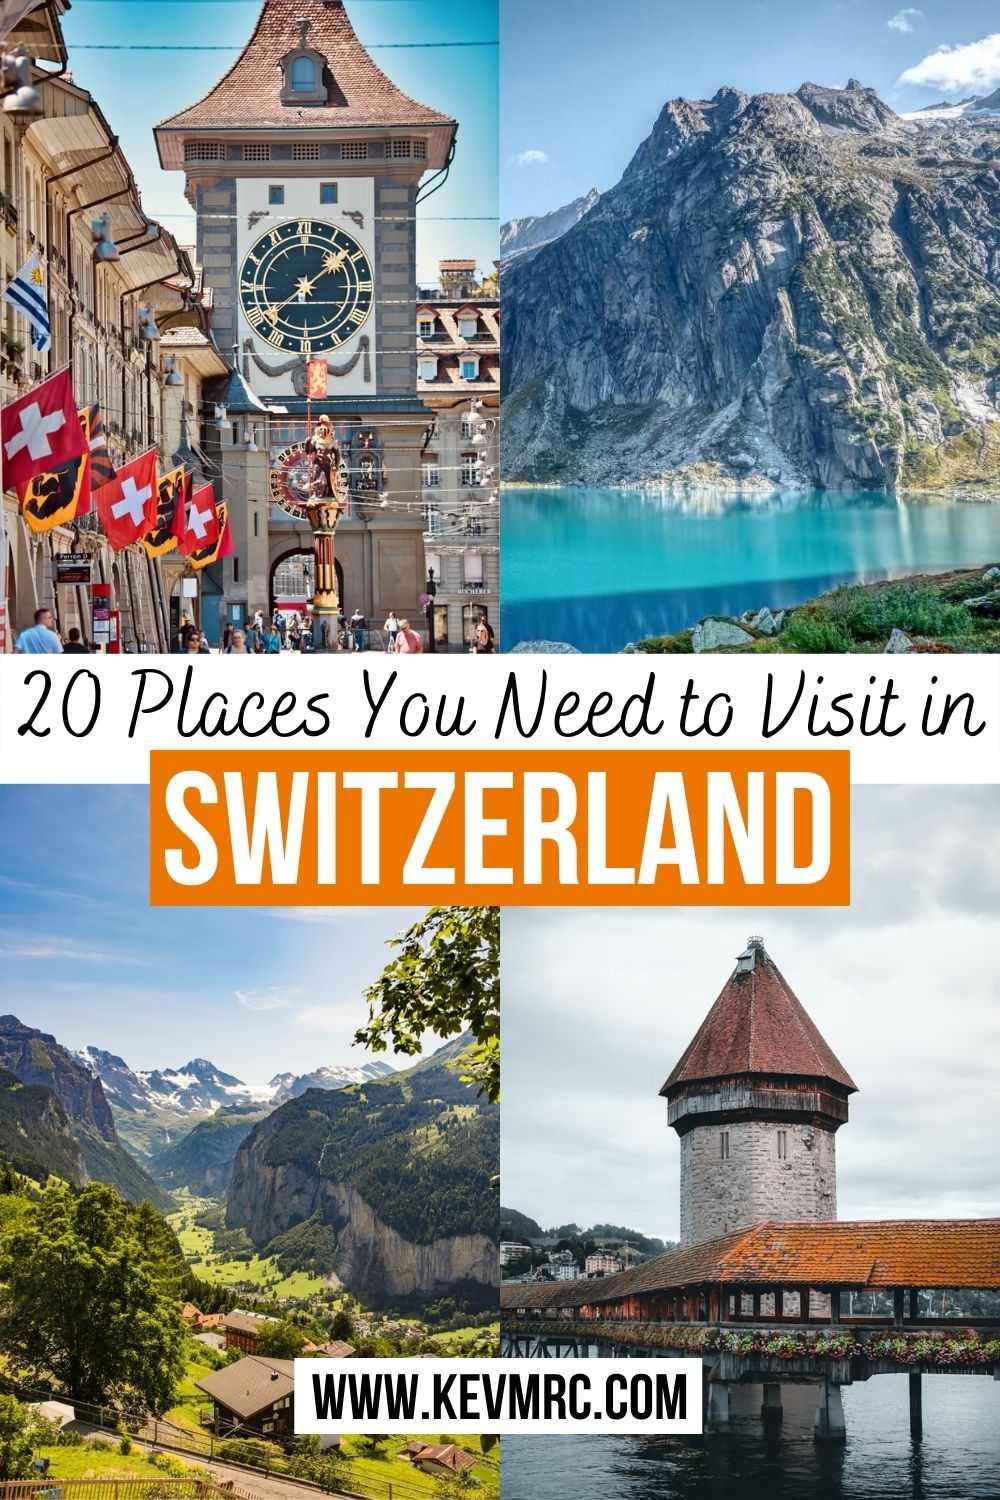 Traveling to Switzerland means discovering a country full of wonderful landscapes. Some spots definitely stand out, so here's a selection of the 20 unique places to visit in Switzerland! switzerland travel guide  | where to go in Switzerland | travel tips for switzerland | cutest towns in Switzerland | bucket list locations for Switzerland